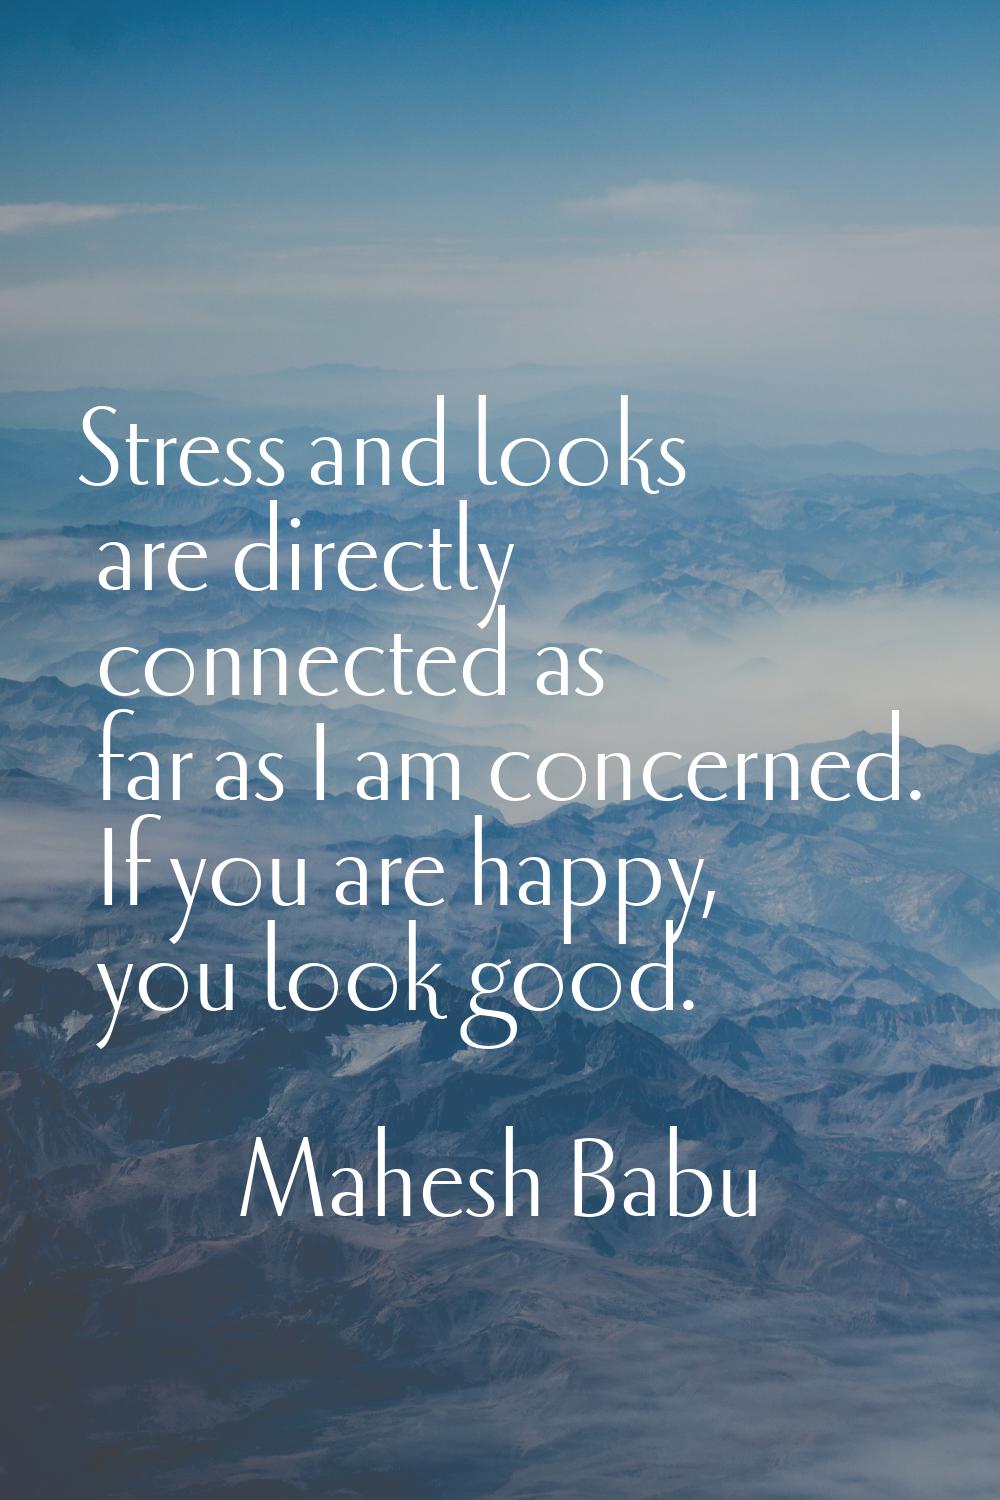 Stress and looks are directly connected as far as I am concerned. If you are happy, you look good.